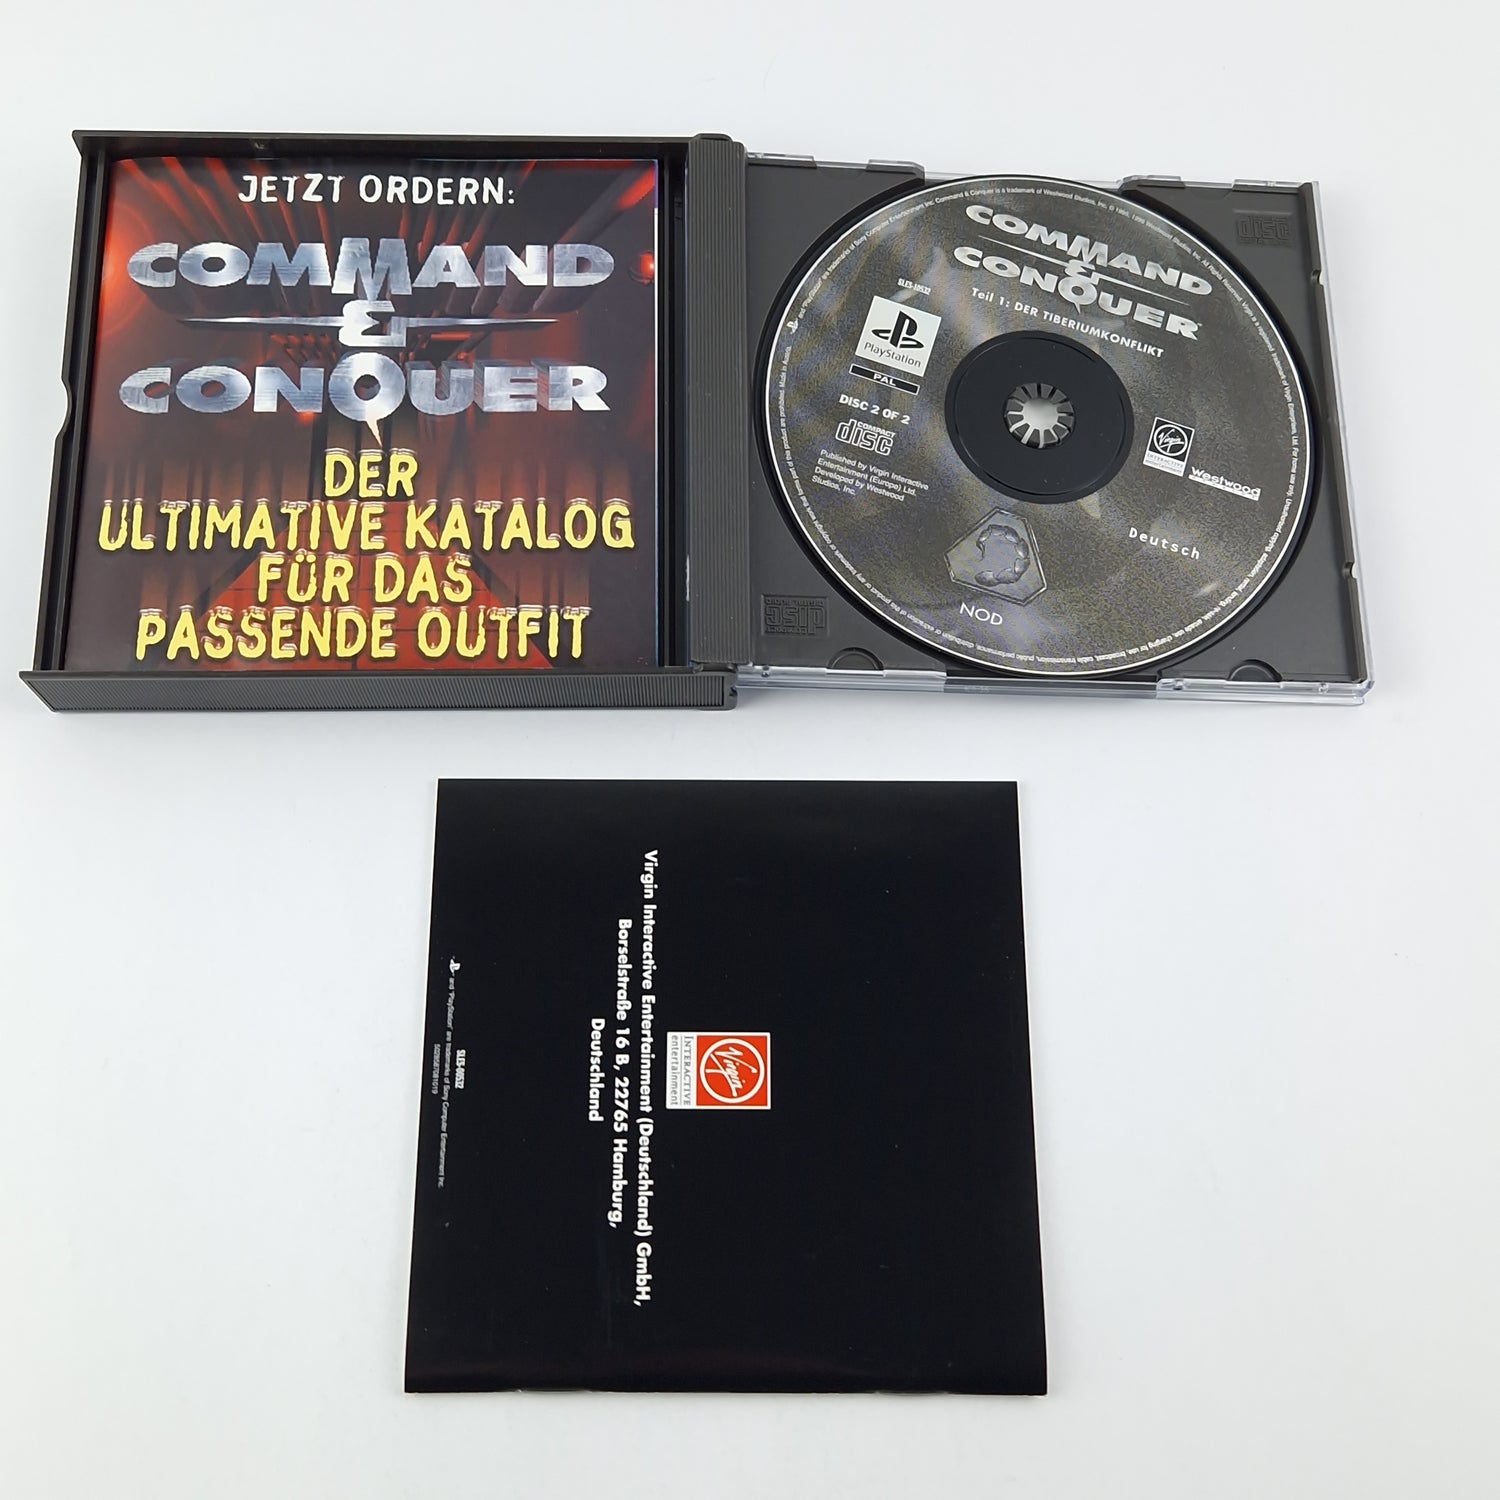 Playstation 1 Game: Command & Conquer Part 1 - OVP Double Case PS1 PSX Psone